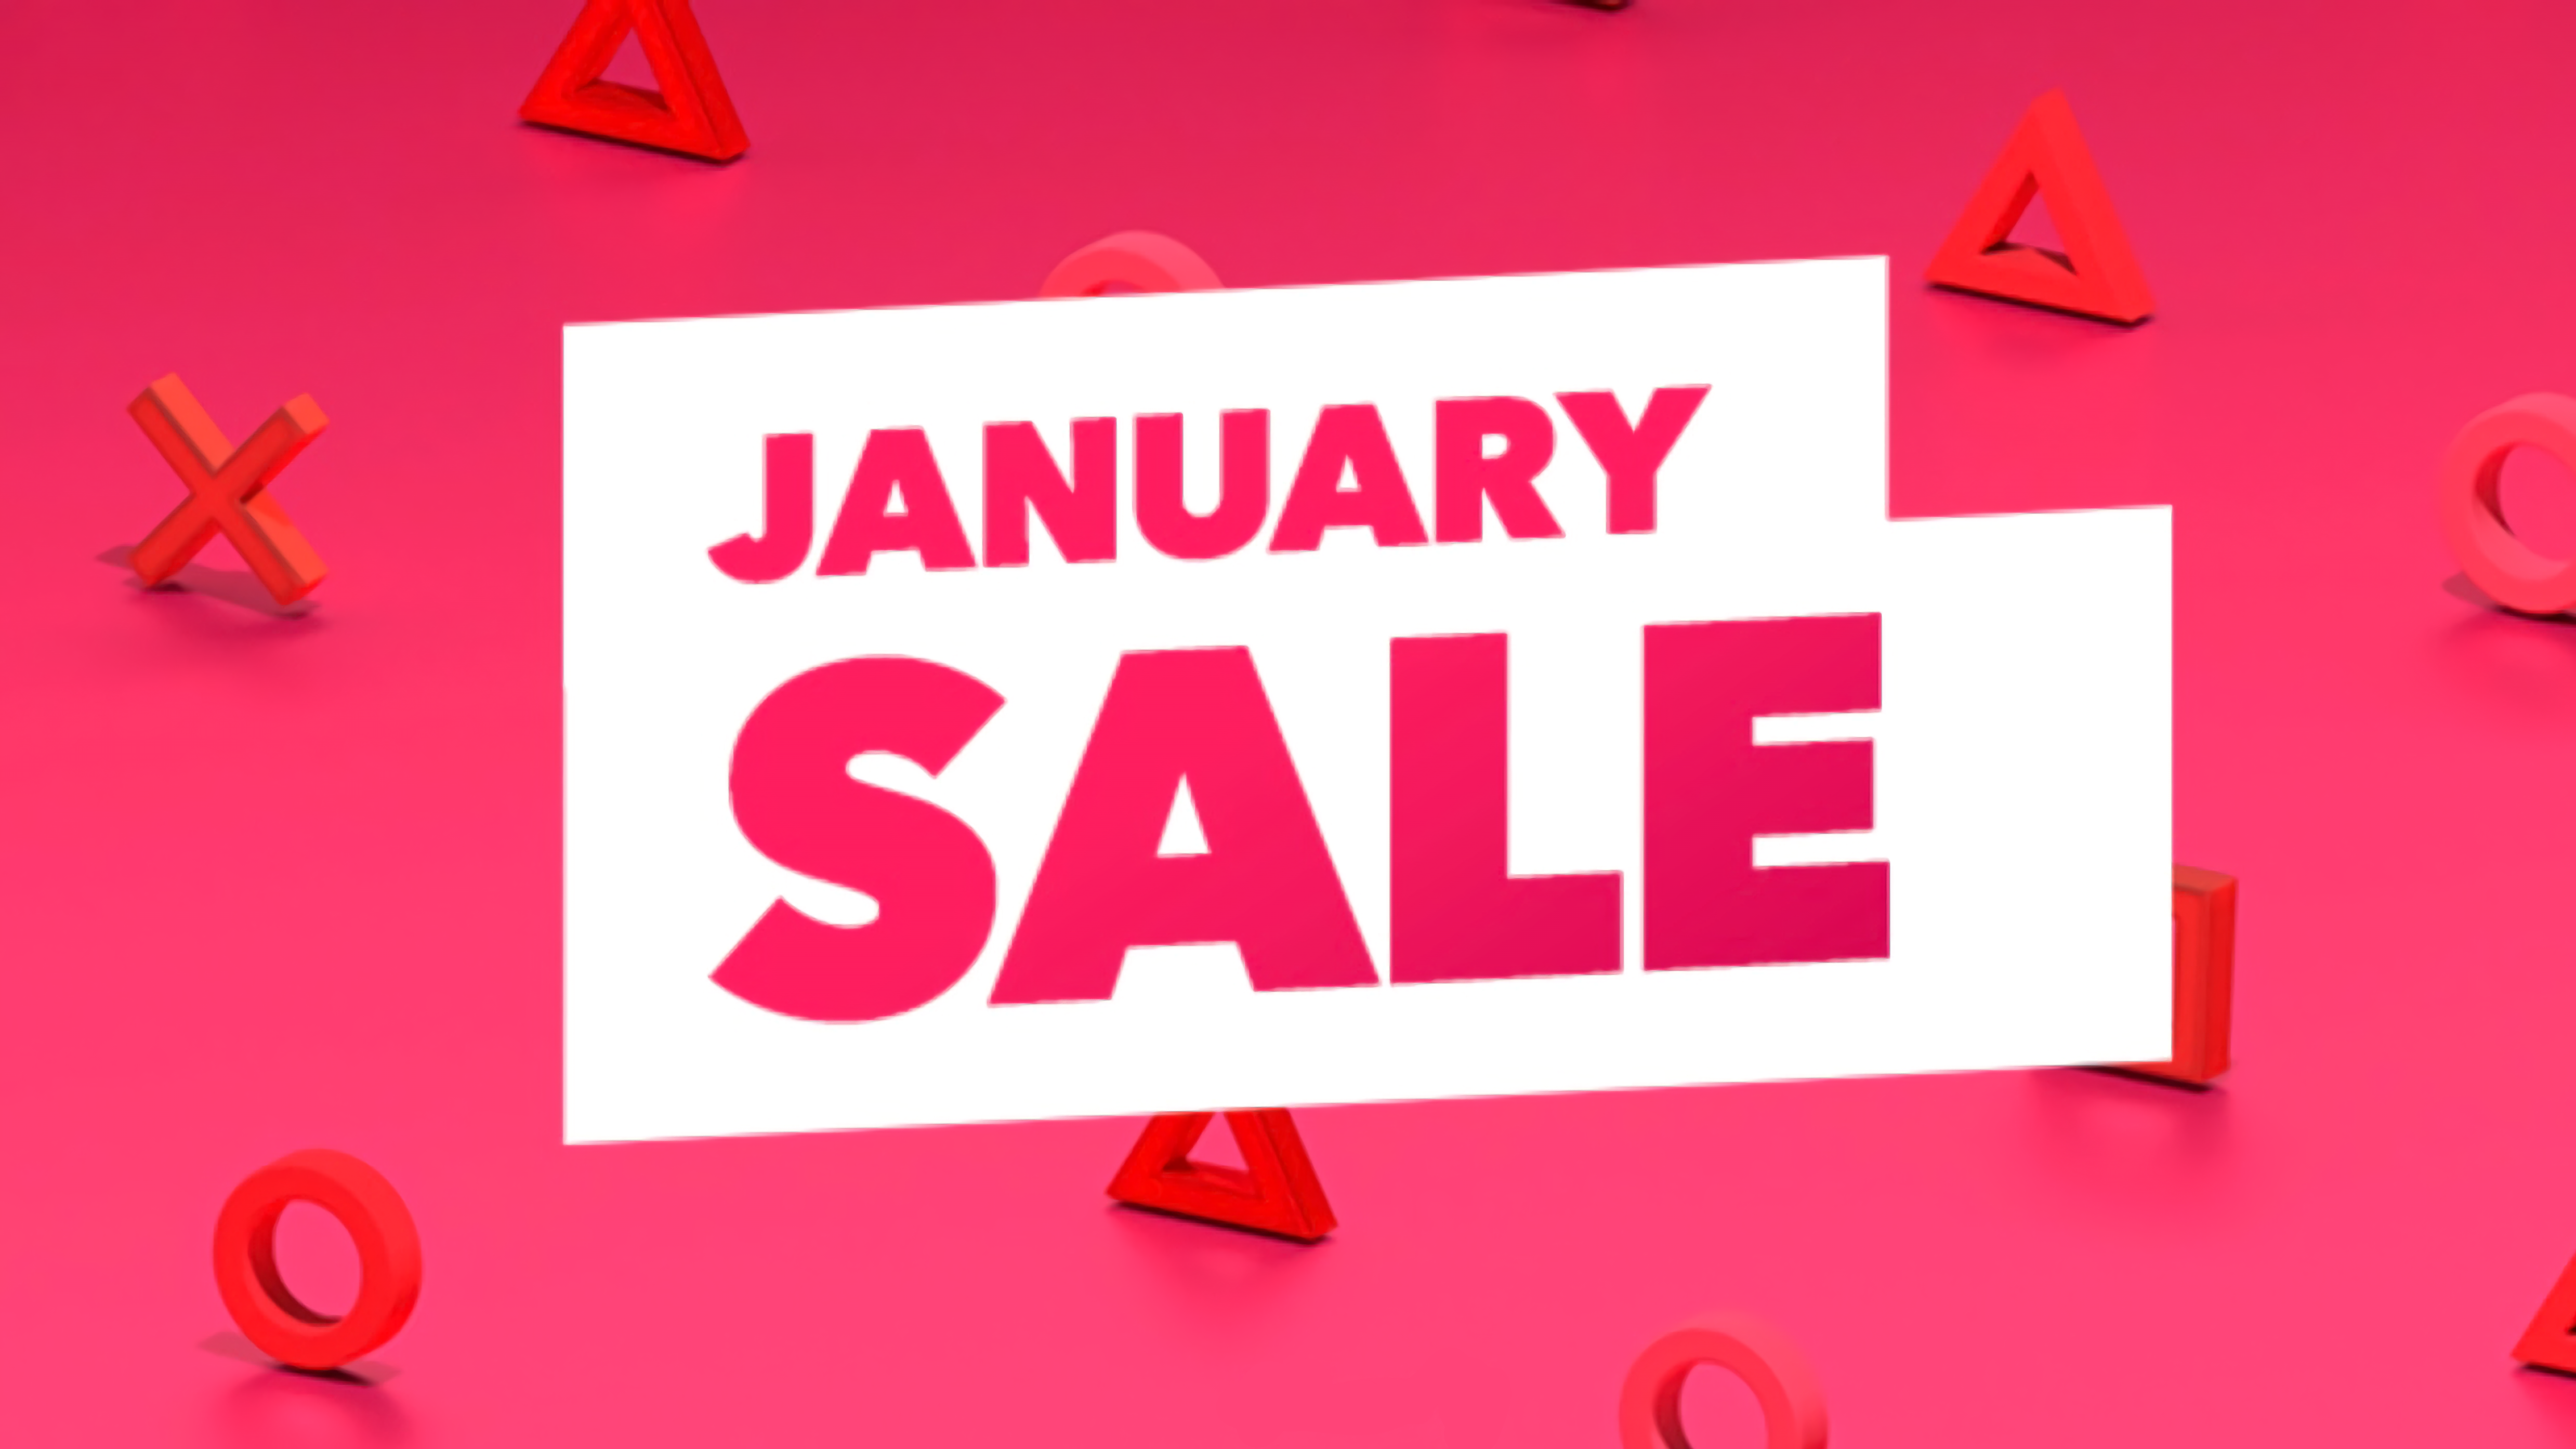 The january sales started and when. PLAYSTATION Summer sale.